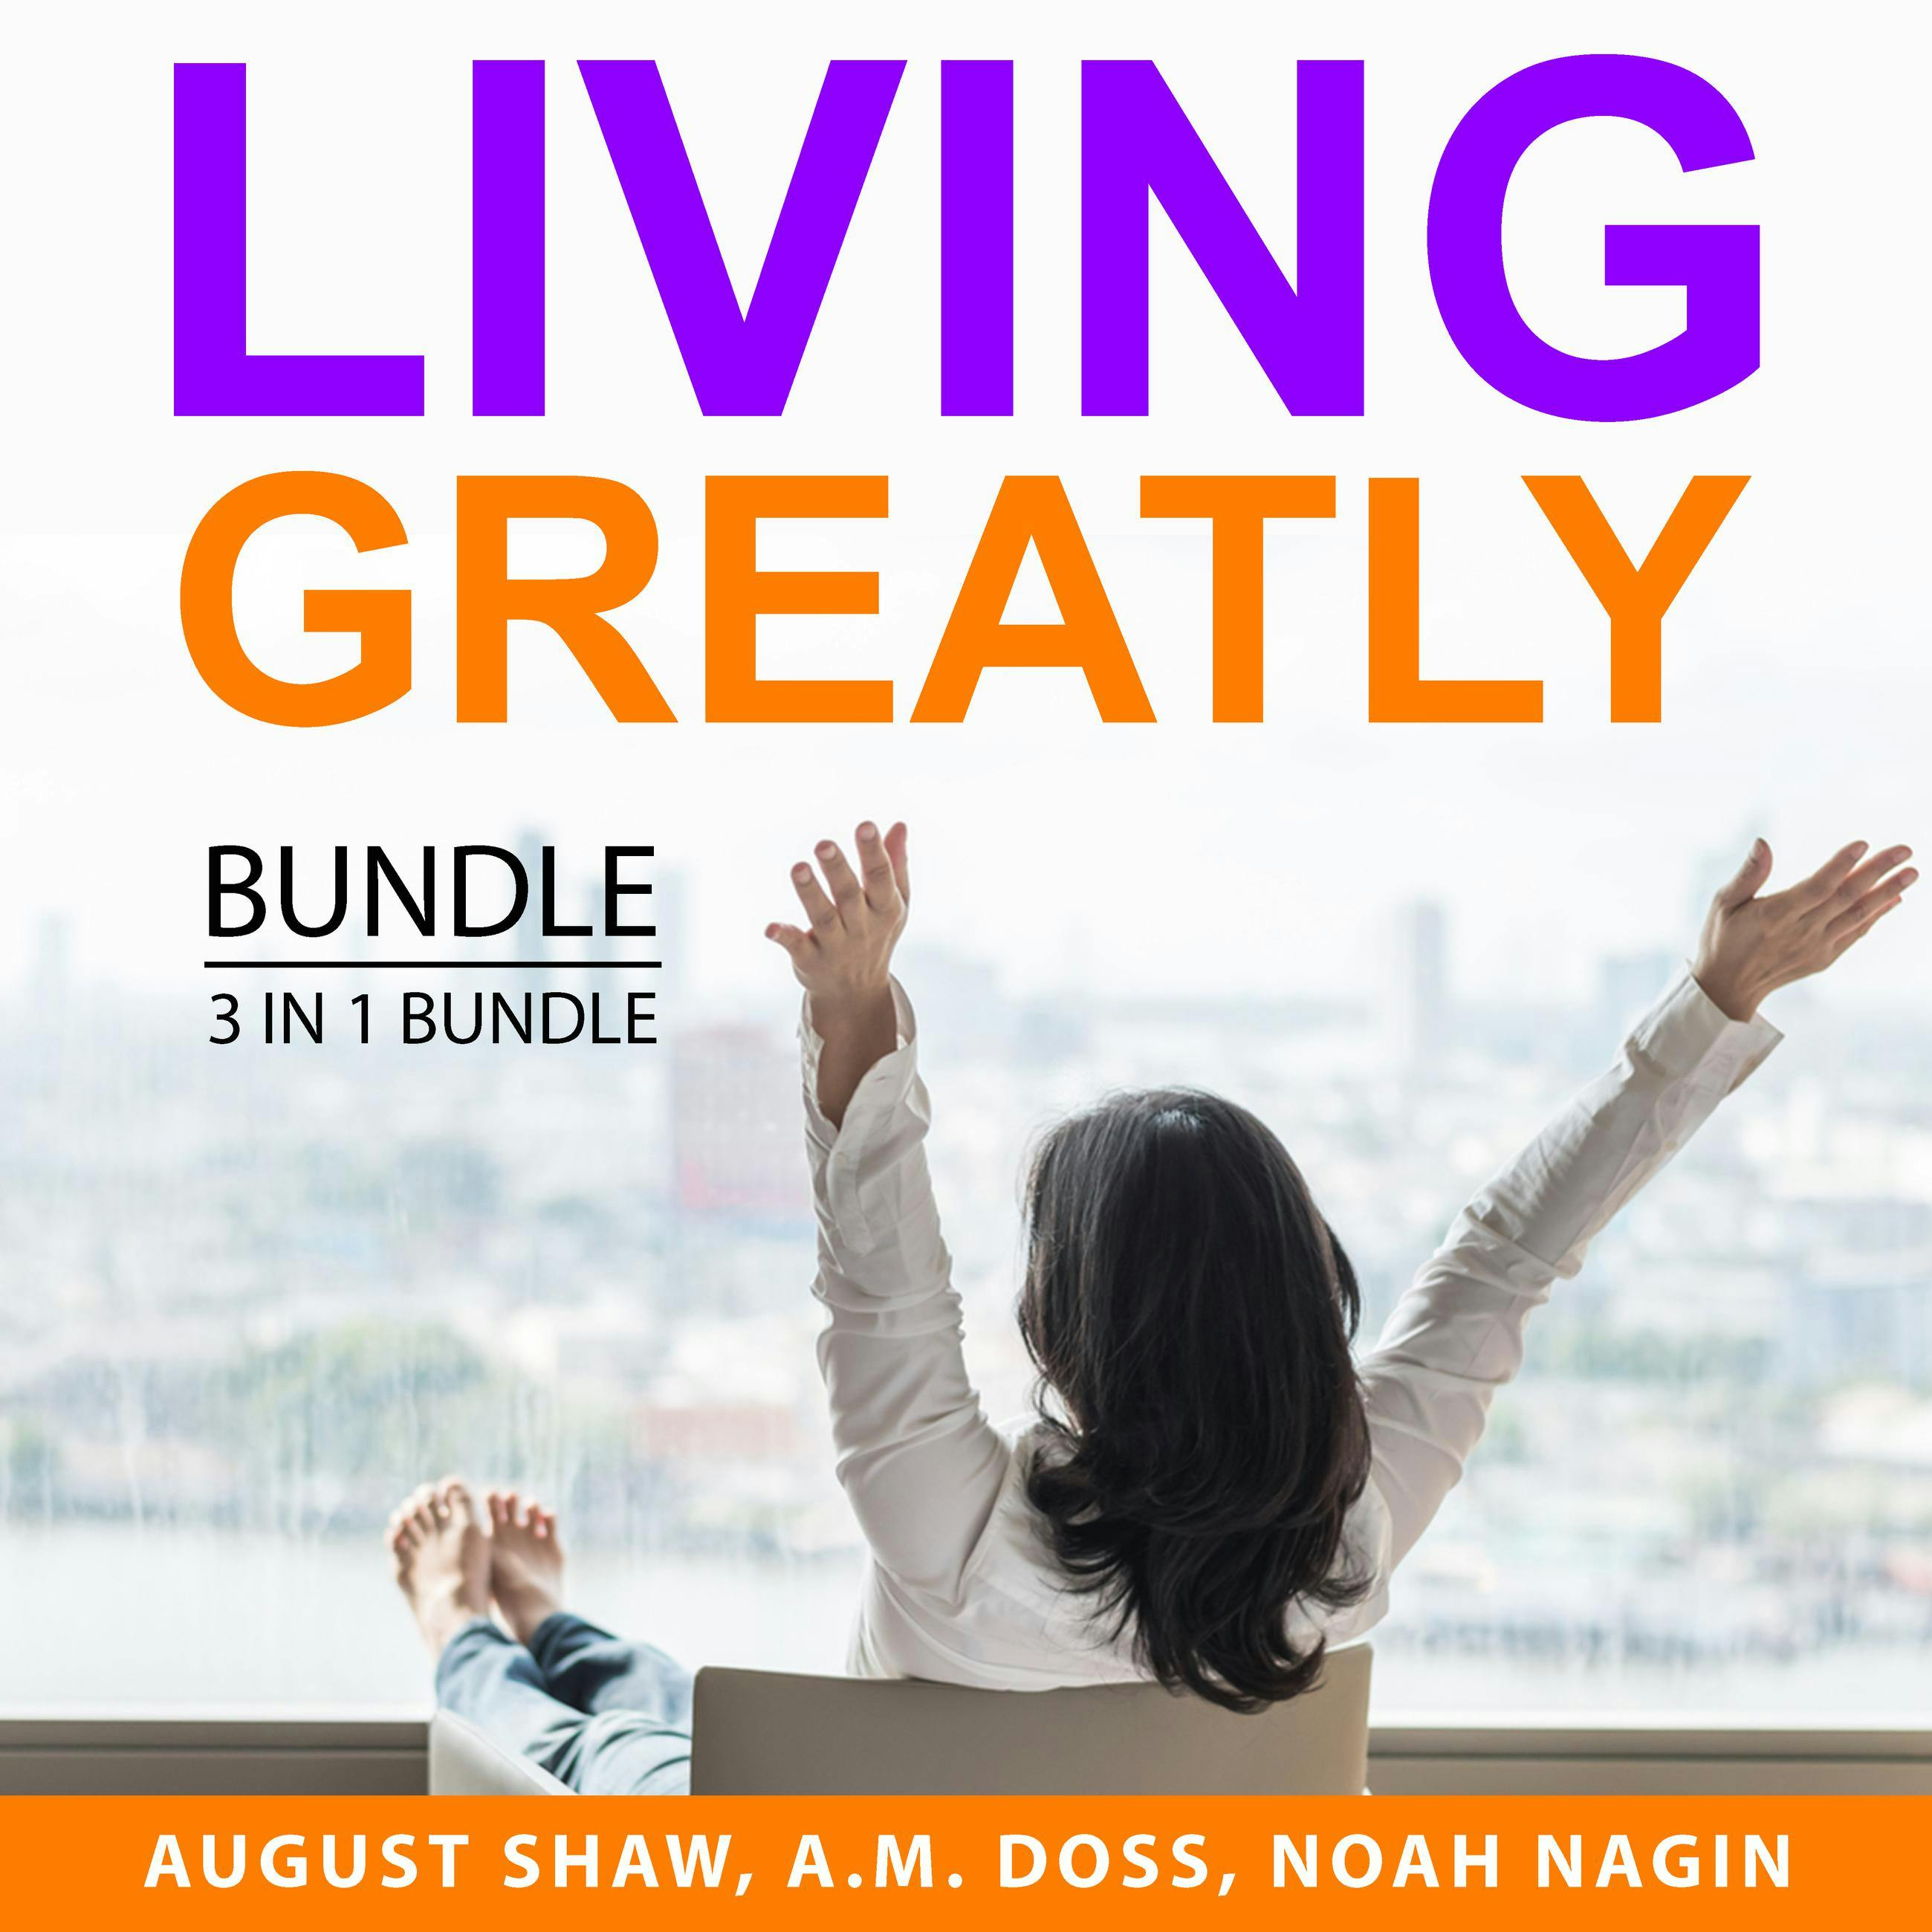 Living Greatly Bundle, 3 in 1 Bundle: Live in the Present Moment, Living the Simple Life, Living a Meaningful Life - undefined